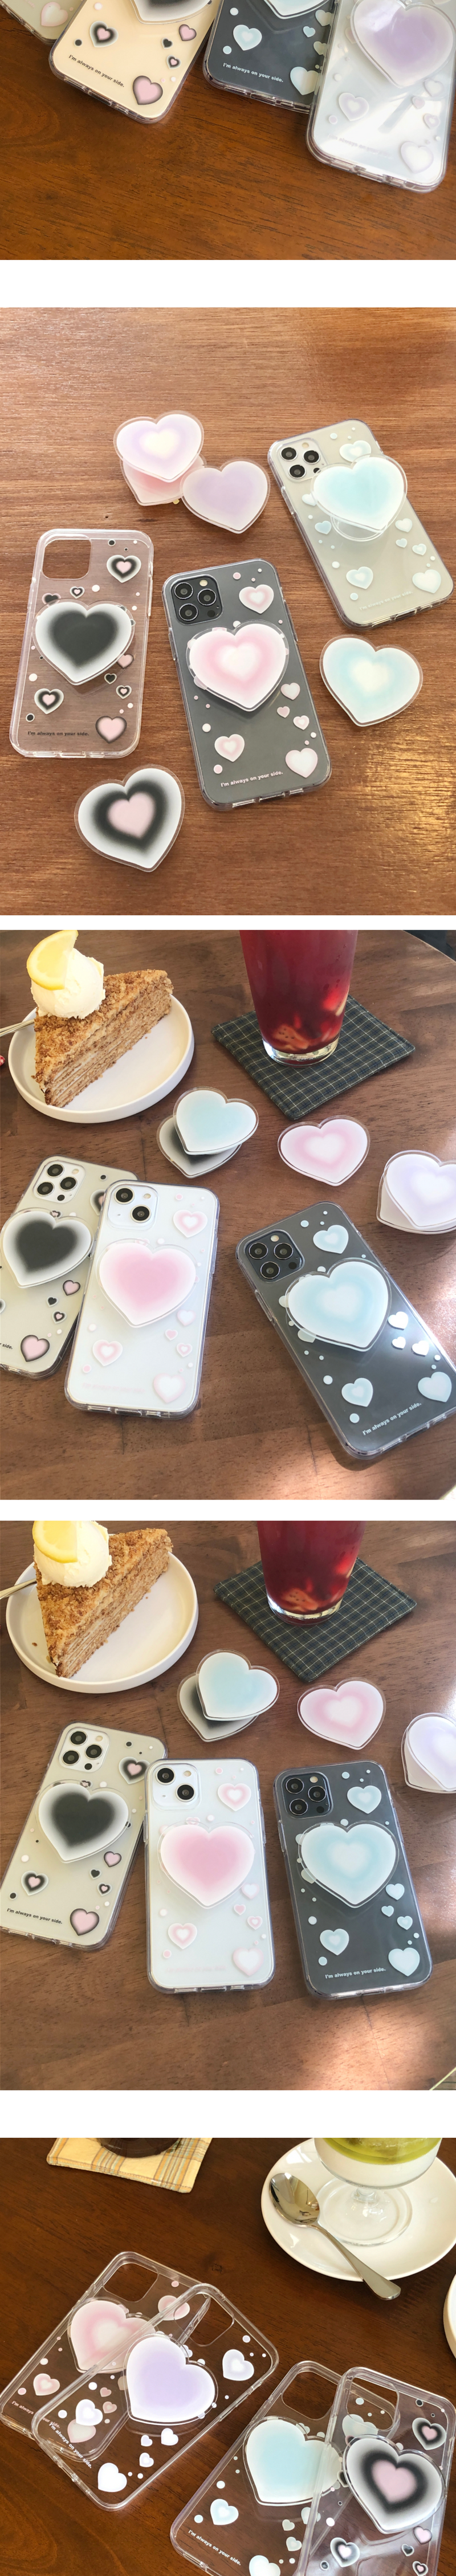 [ROOM 618] Plumpily Heart Glossy Case